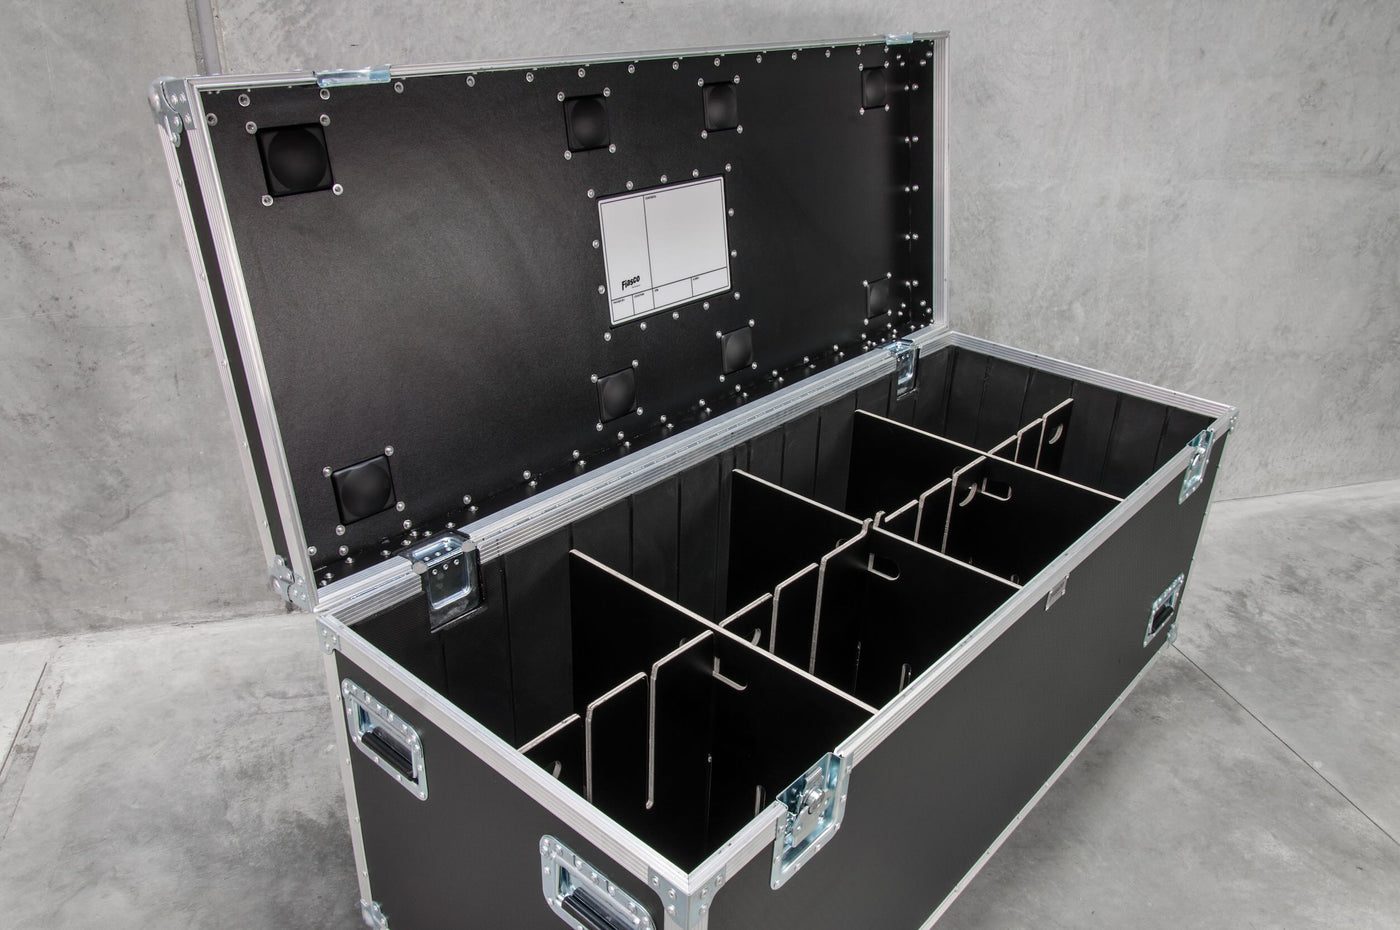 24 x 60 Case With Divider Inserts